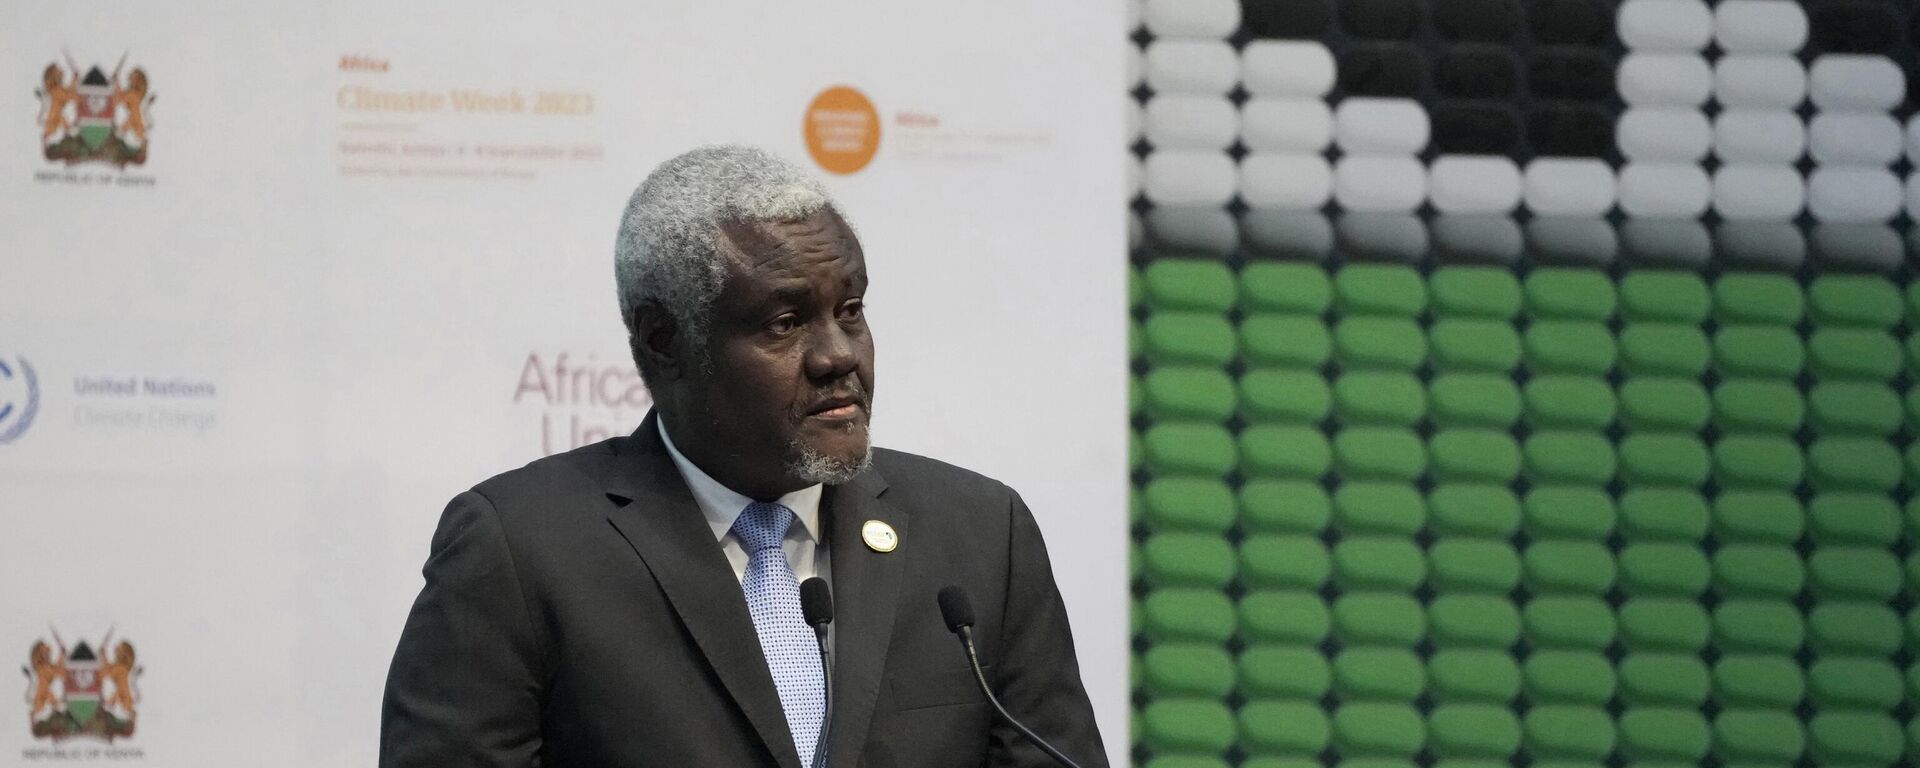 African Union chairperson Moussa Faki Mahamat, addresses delegates during the closing session of the Africa Climate Summit at the Kenyatta International Convention Centre in Nairobi, Kenya, Wednesday, Sept. 6, 2023.  - Sputnik Africa, 1920, 09.09.2023